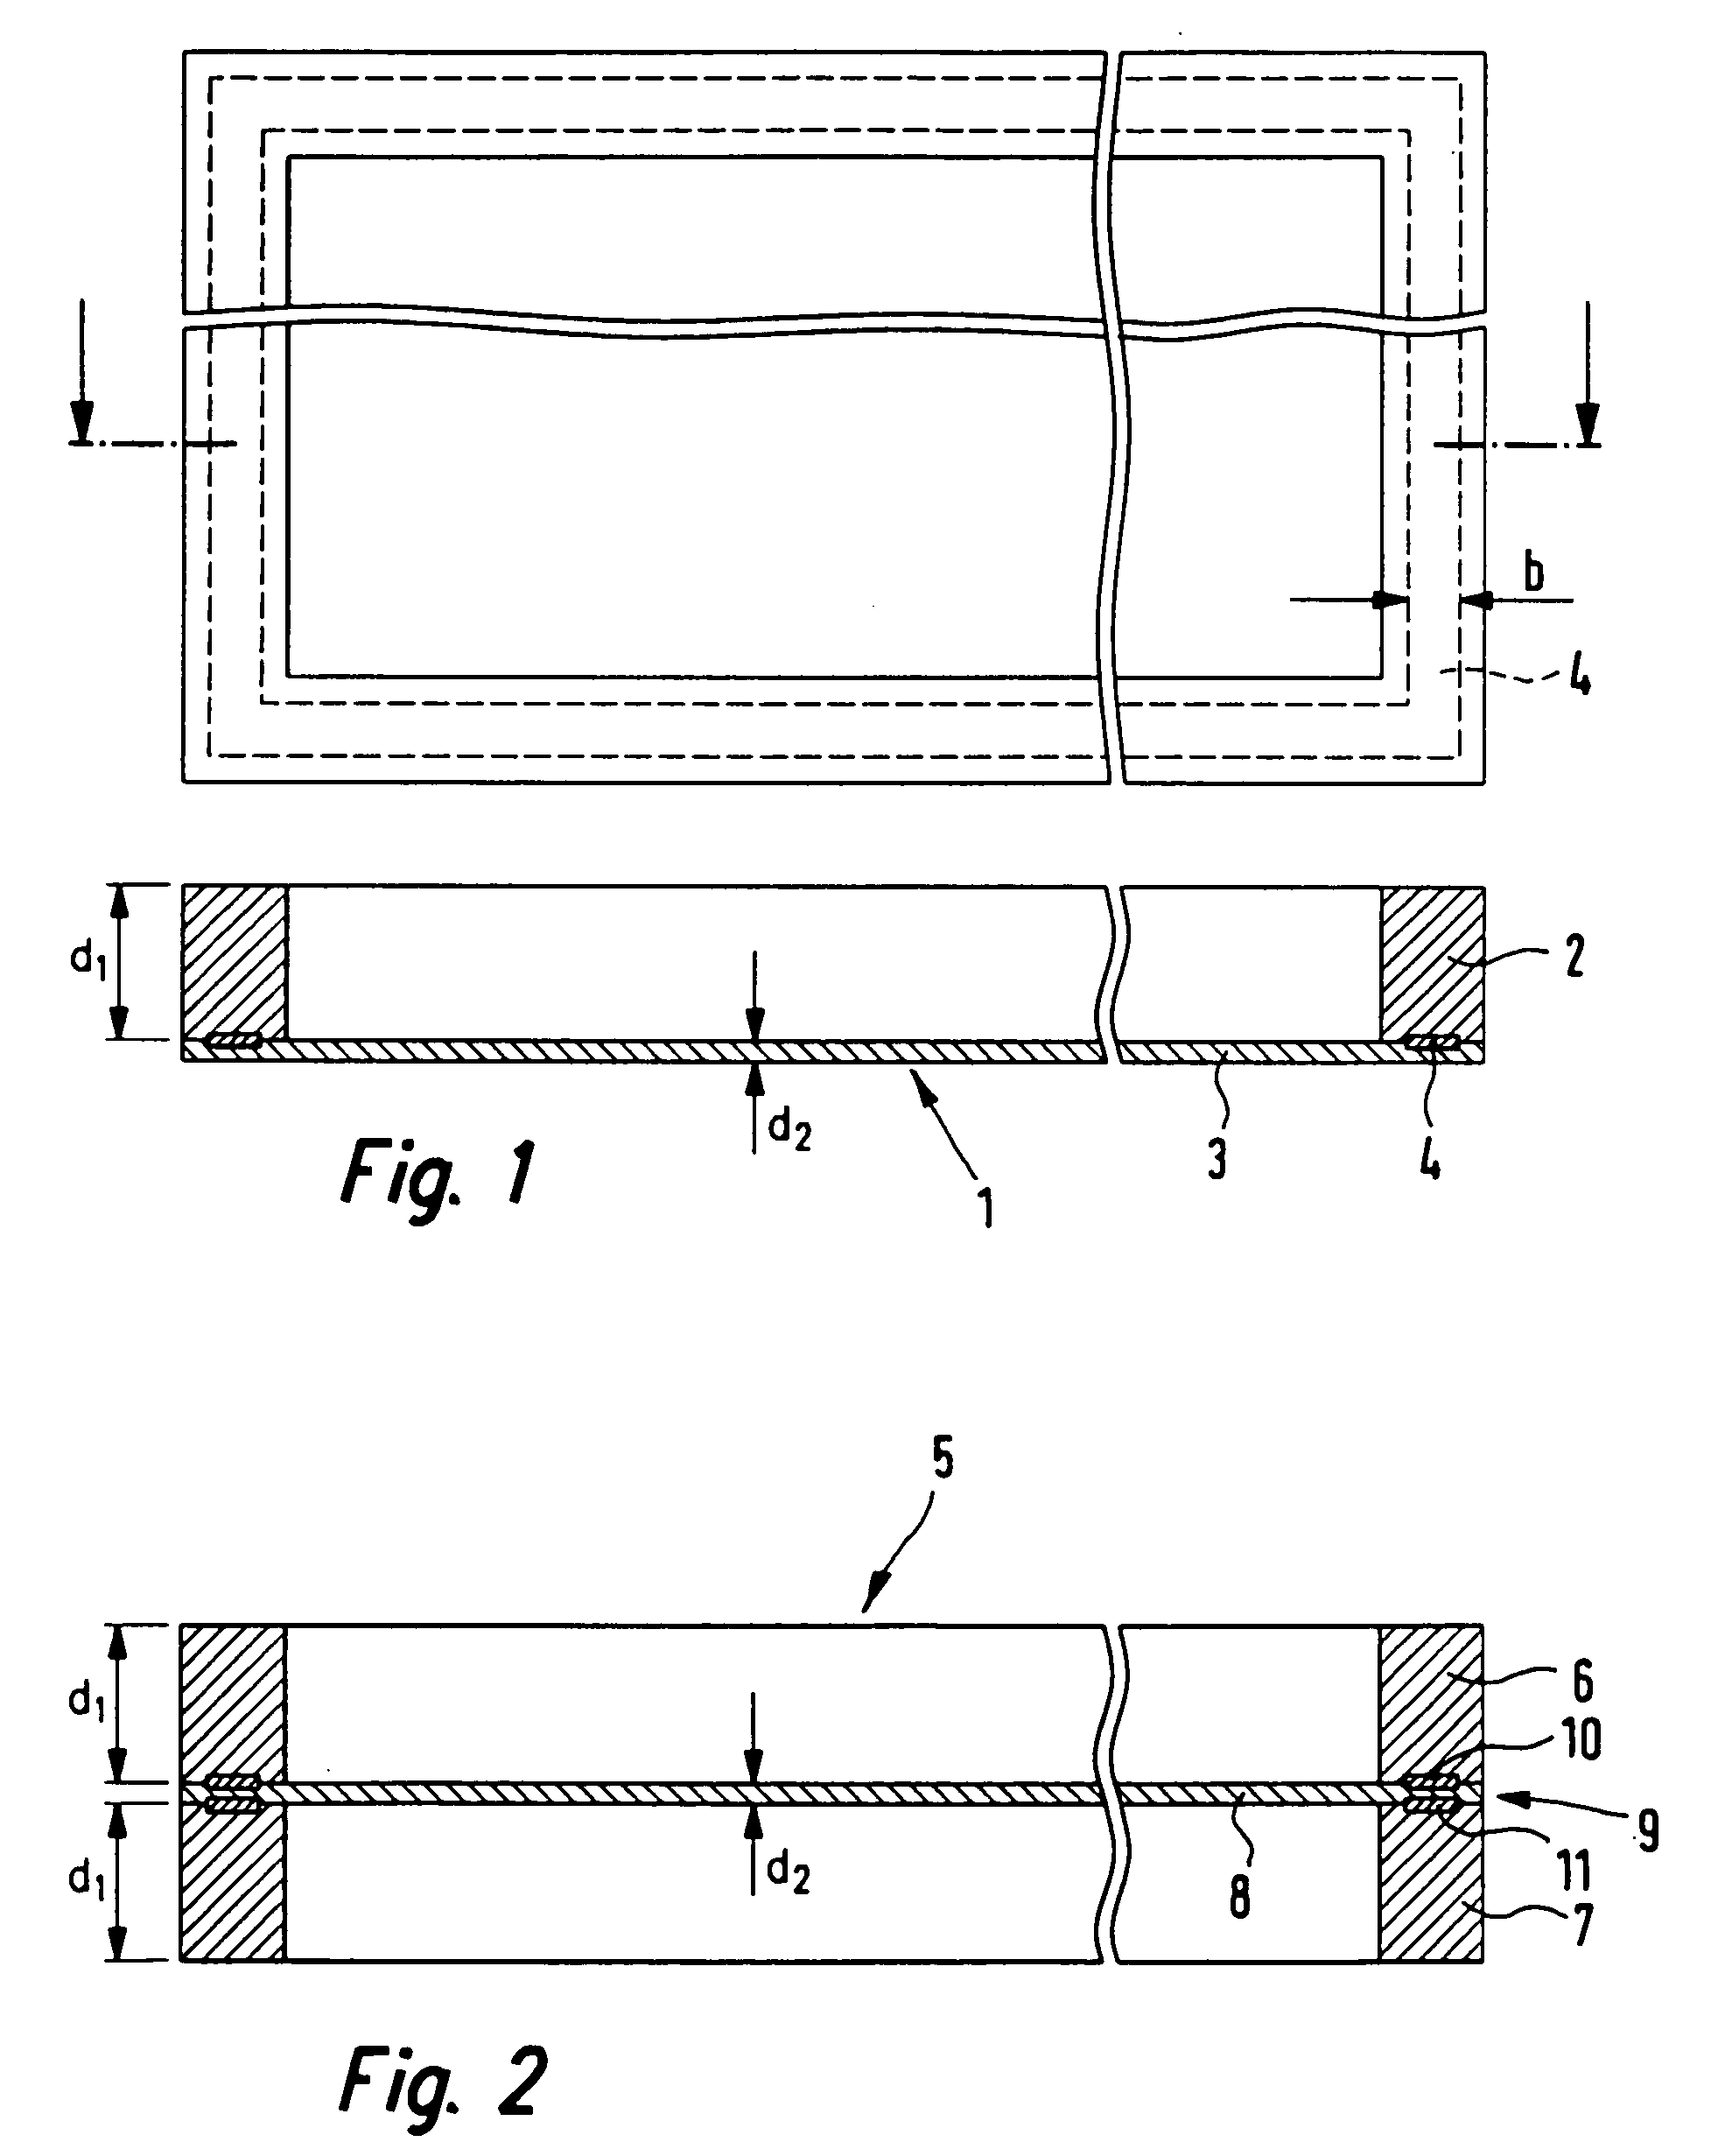 Method and system for resistance seam welding of a foil and at least one foil support of a fuel cell system